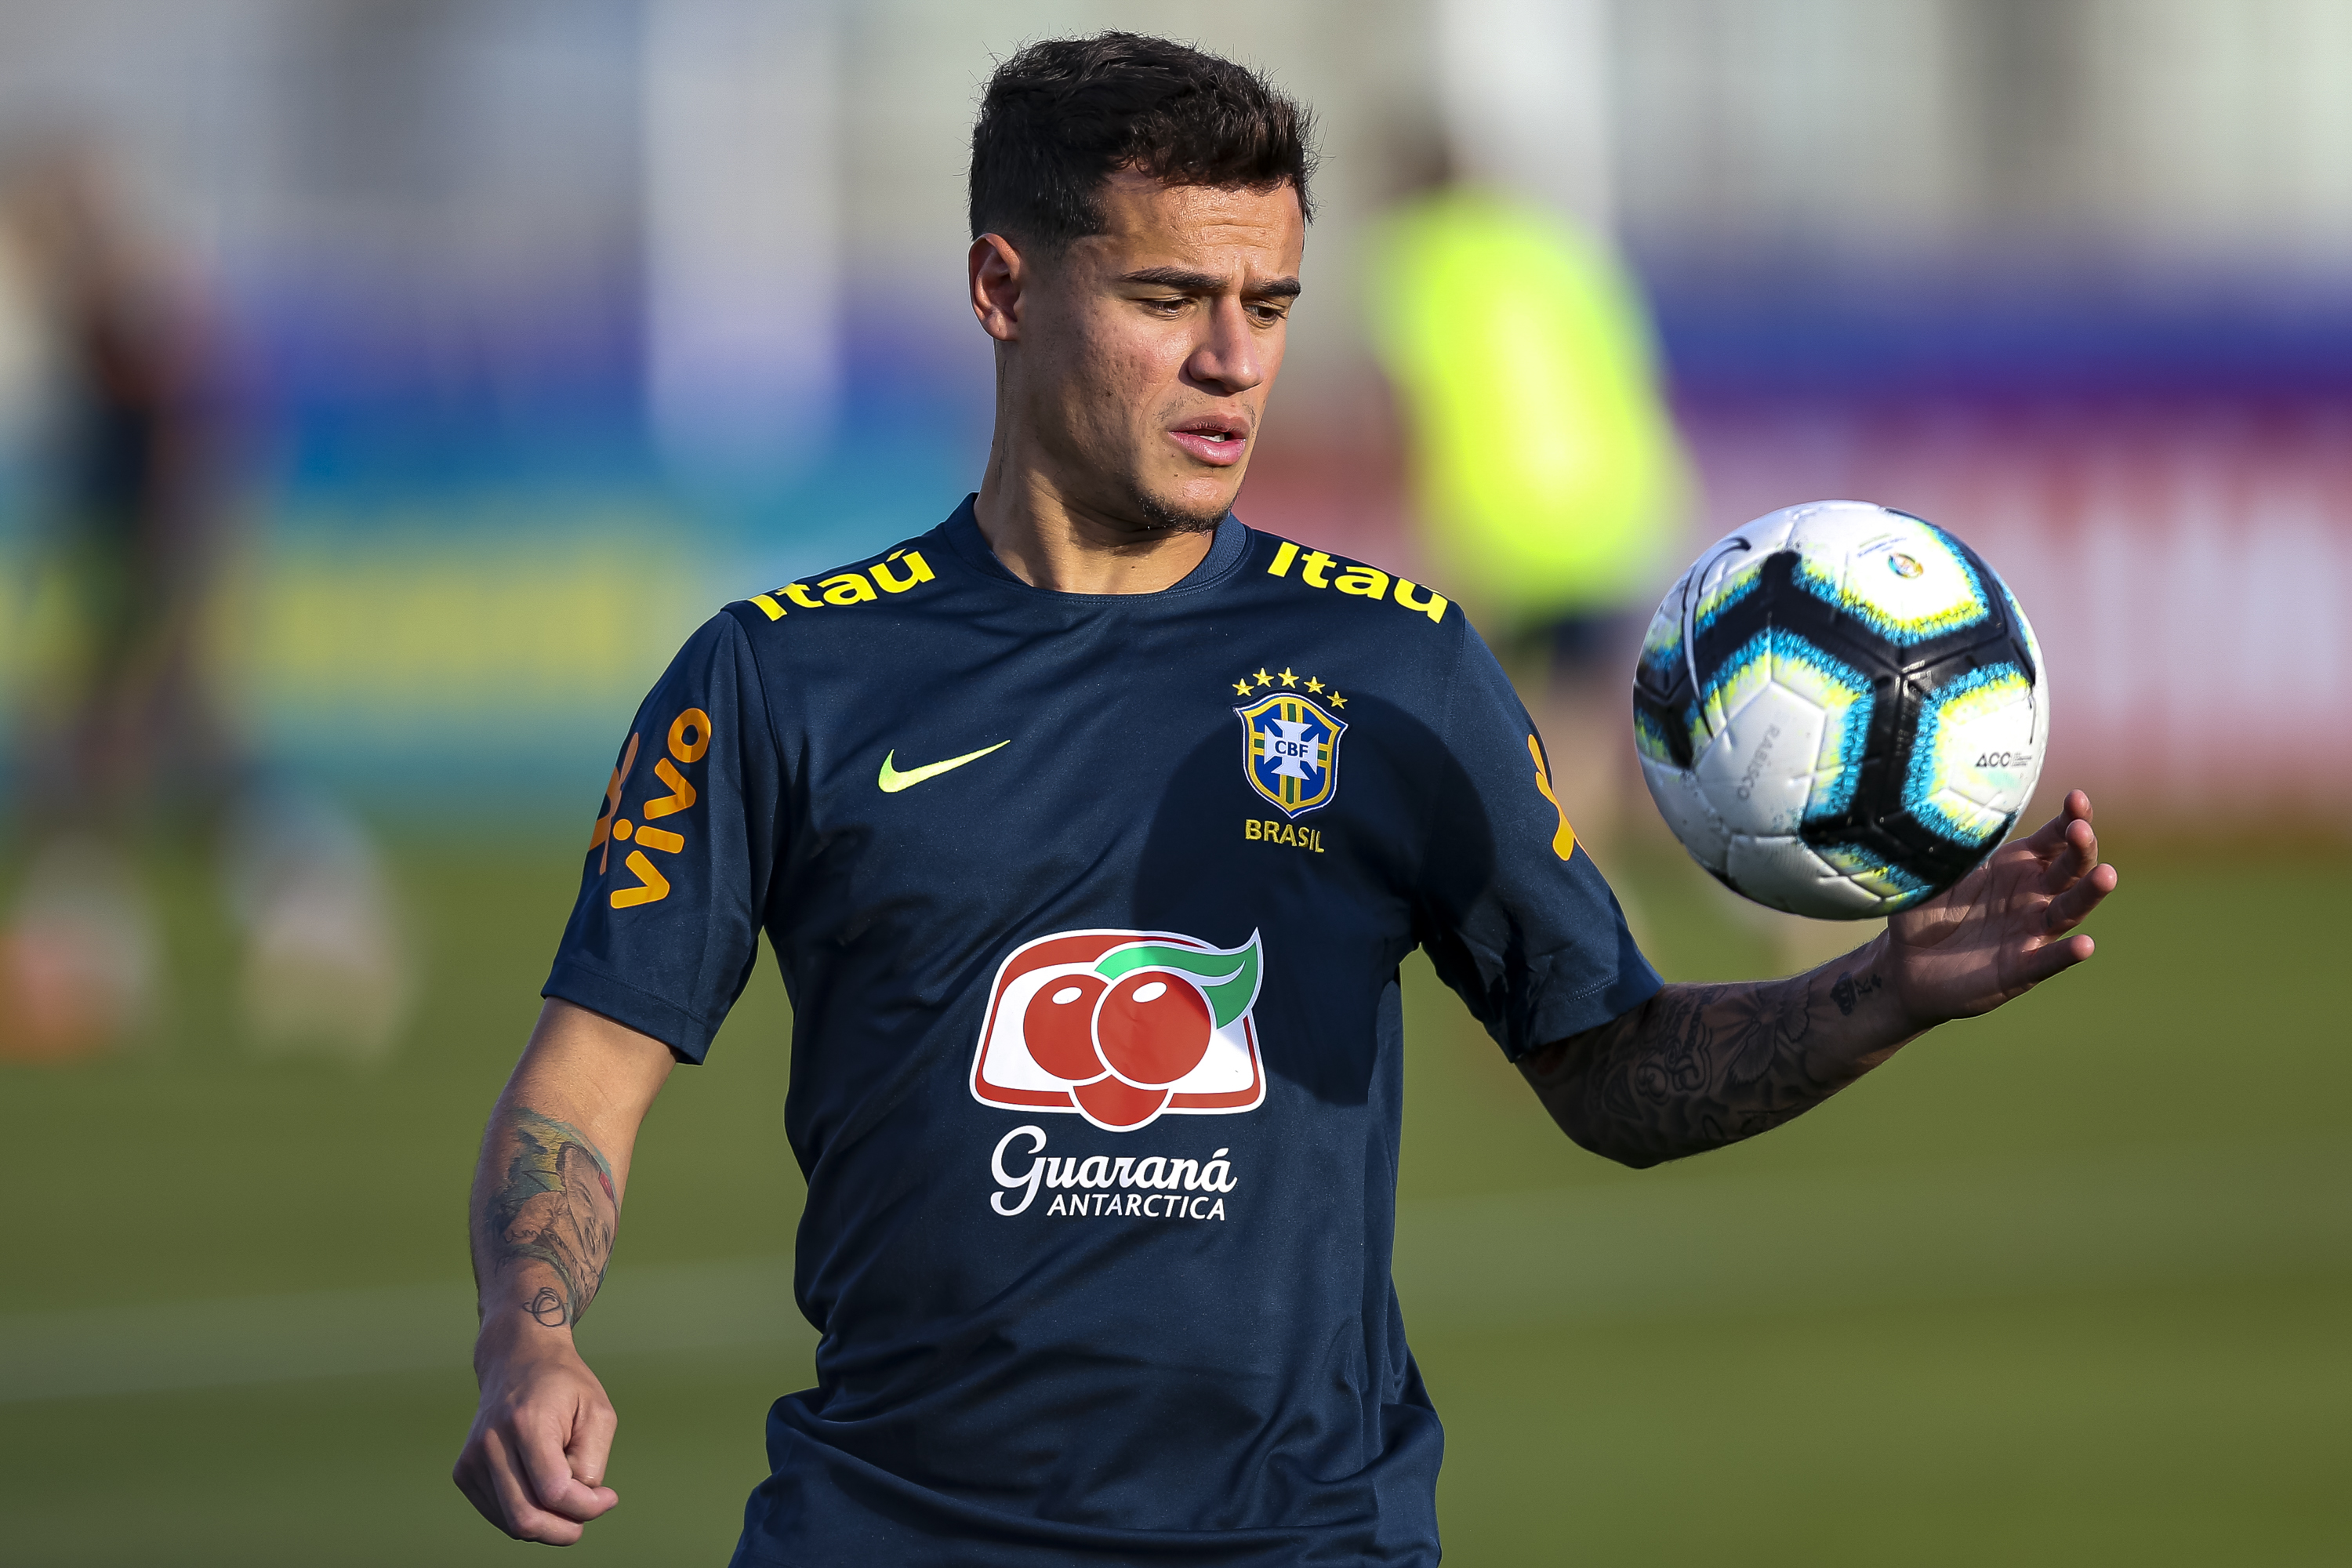 PORTO ALEGRE, BRAZIL - JUNE 07: Philippe Coutinho controls the ball in a training session at the Gremio team training centre on June 07, 2019 in Porto Alegre, Brazil. (Photo by Buda Mendes/Getty Images)